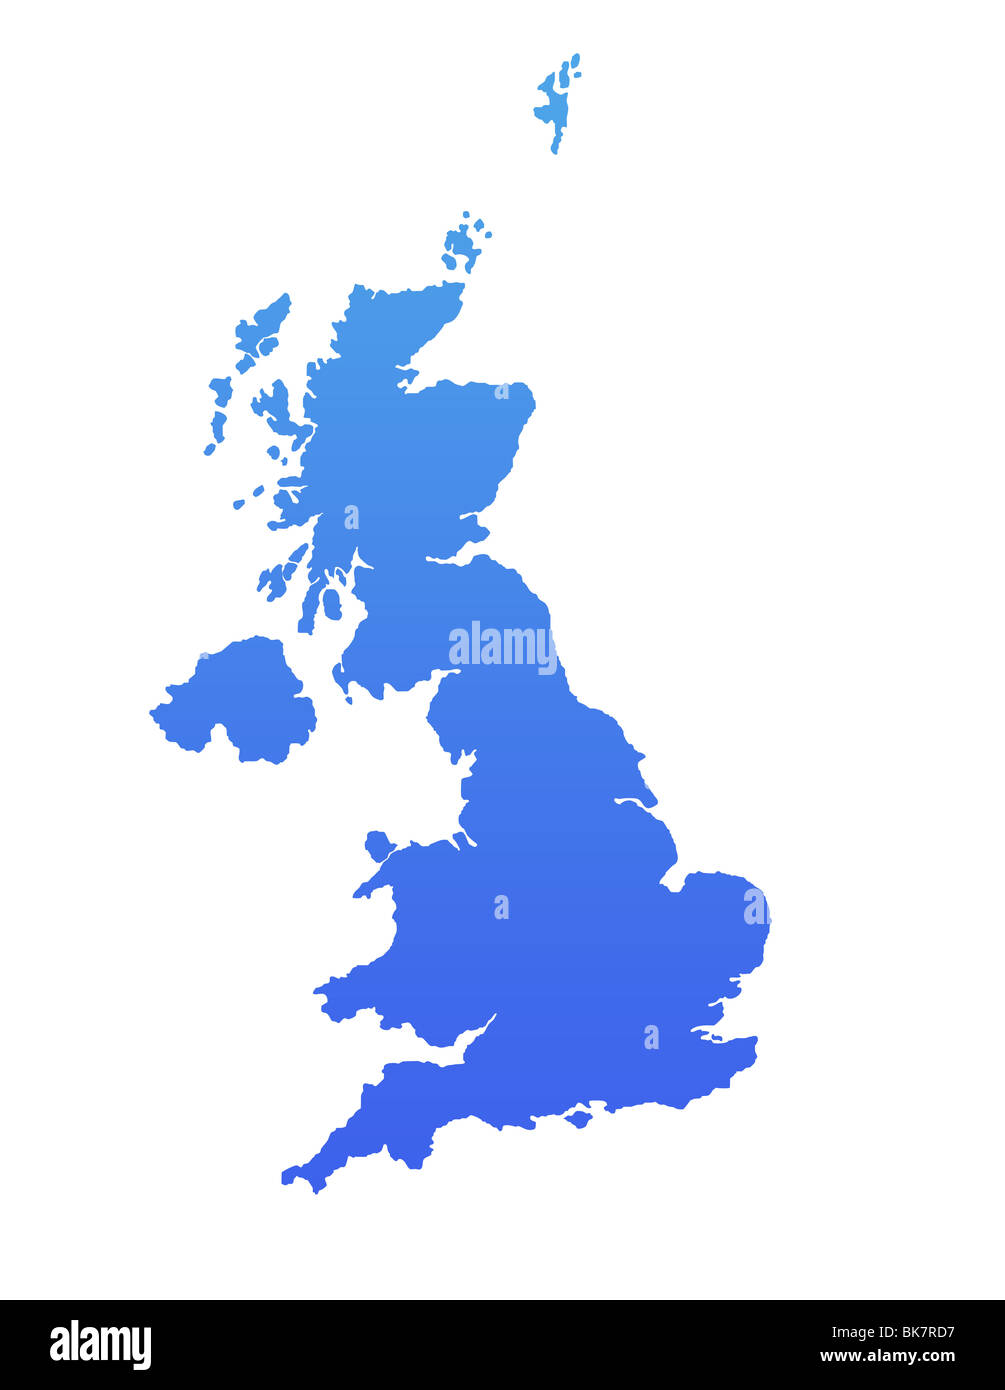 England or United Kingdom map in gradient blue, isolated on white background. Stock Photo